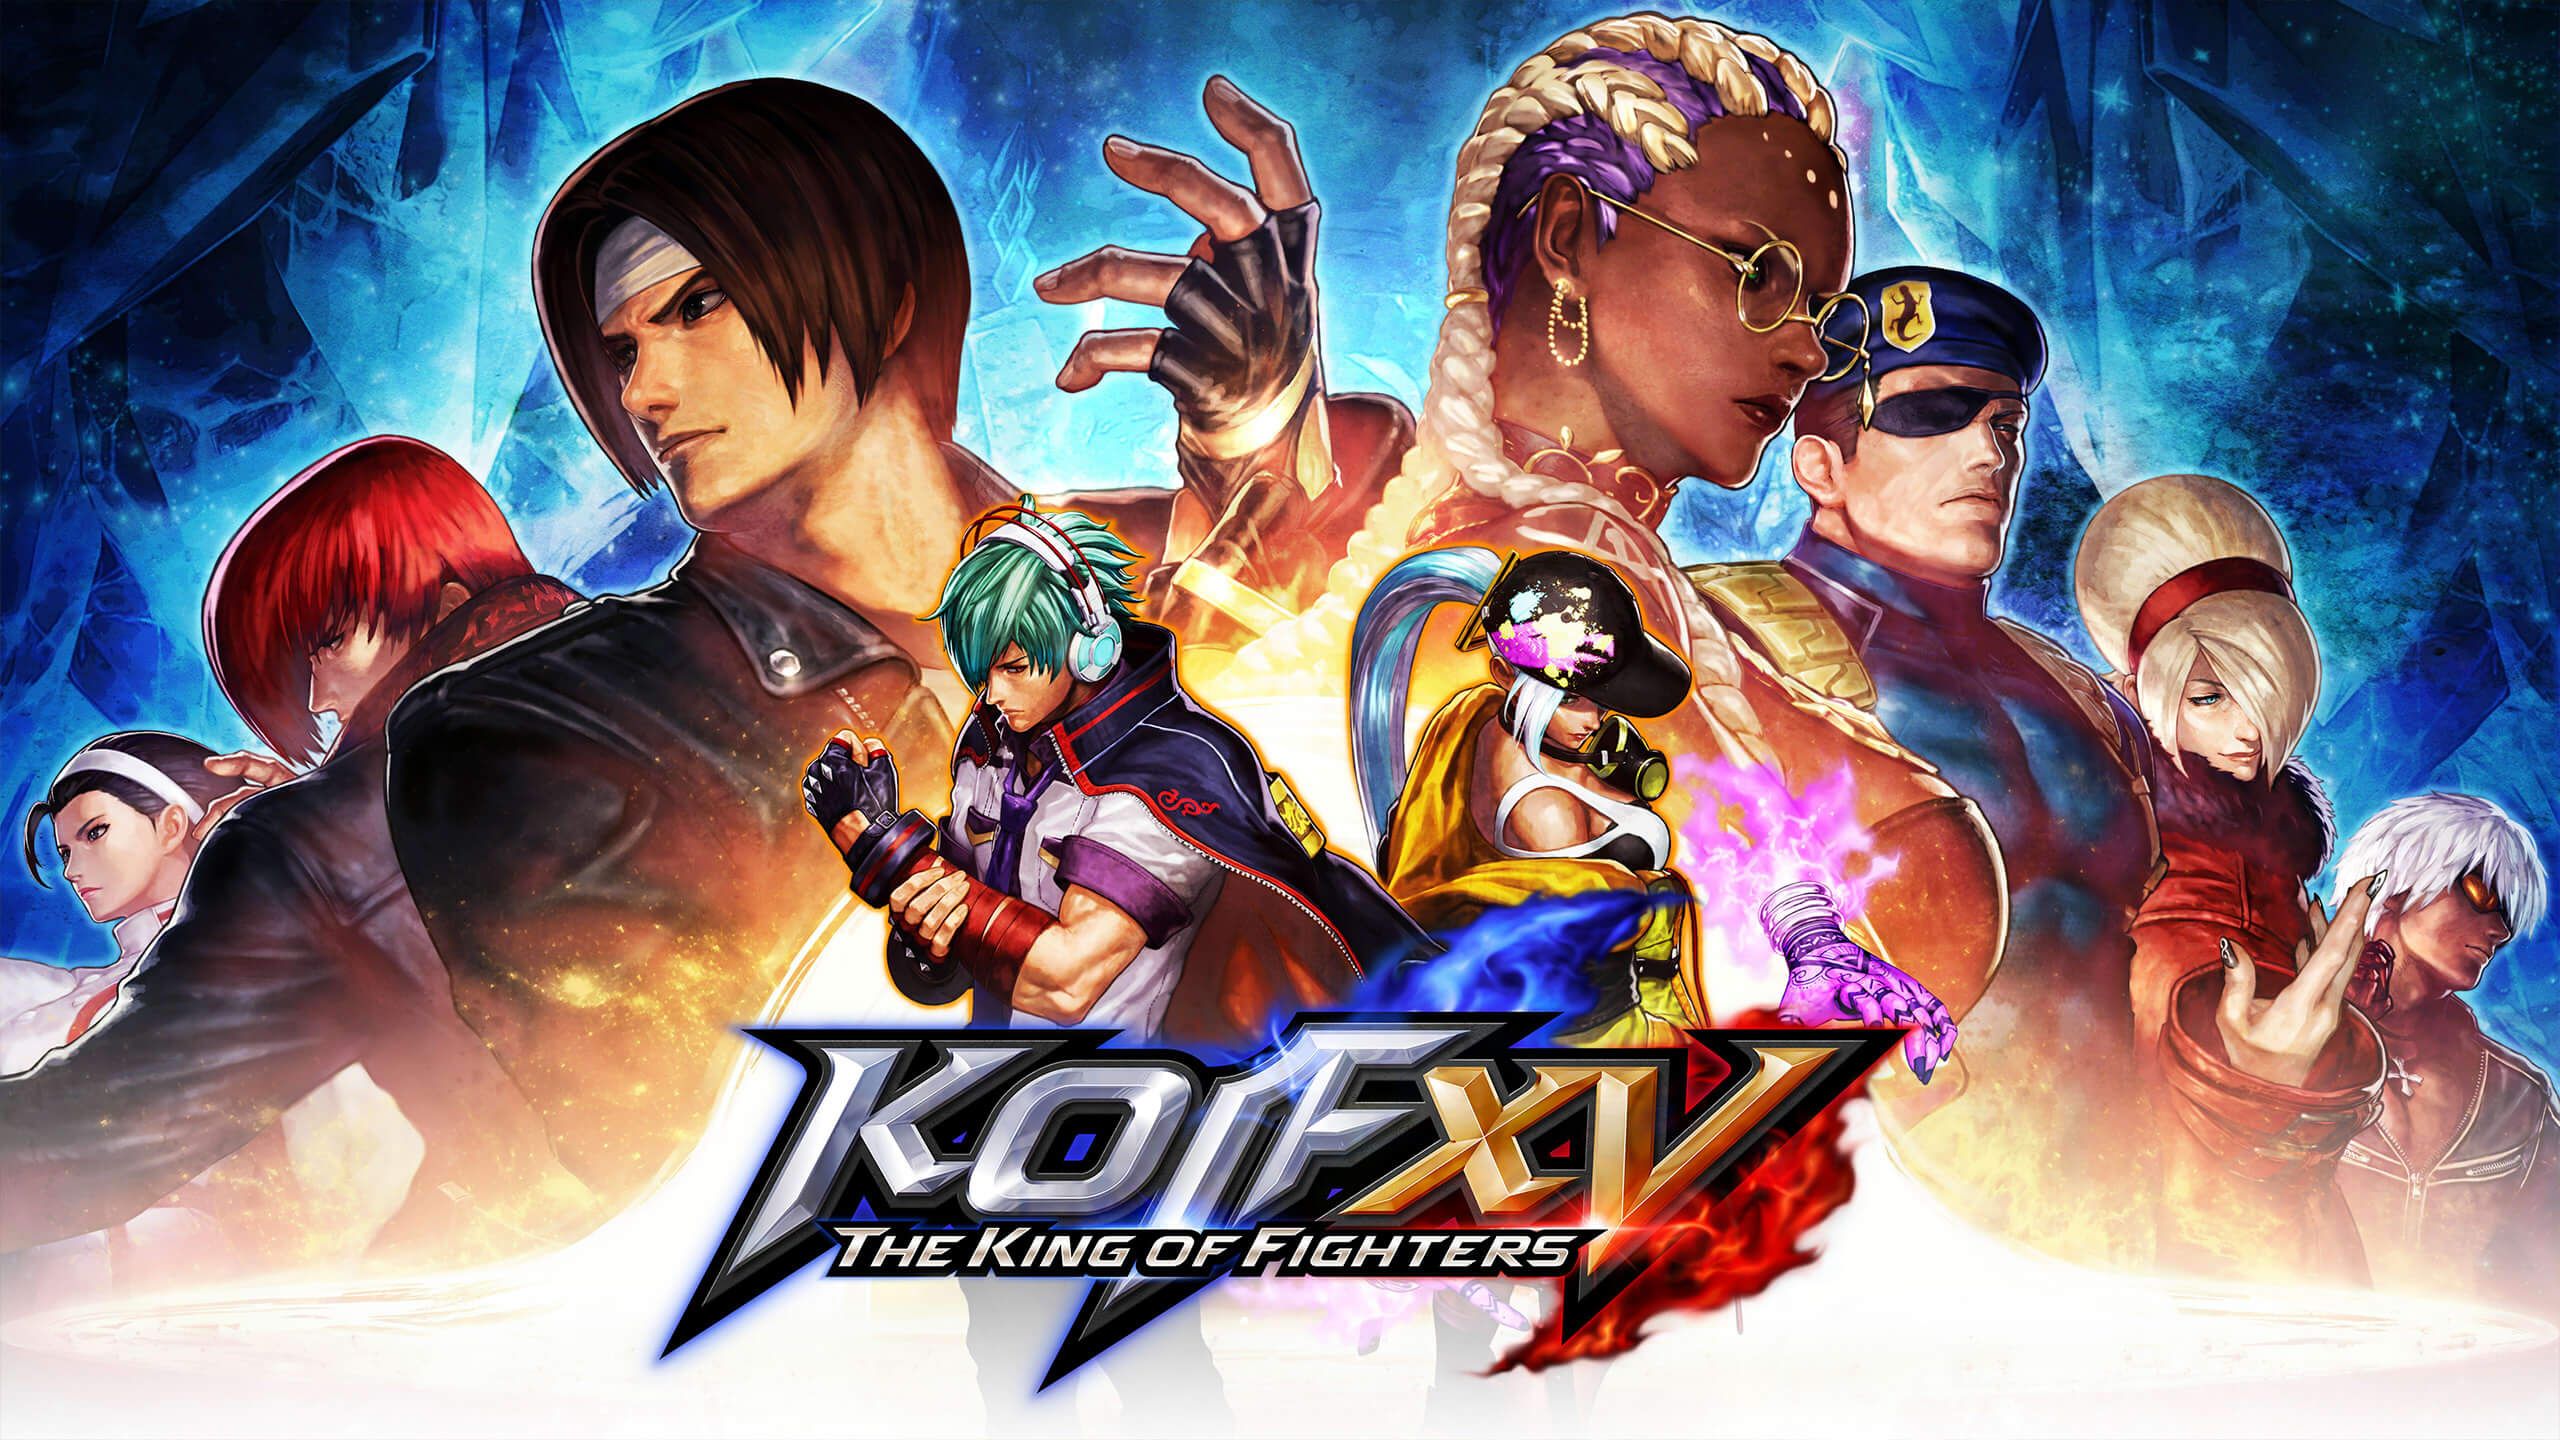 The King of Fighters XV Version 1.52 Patch Notes